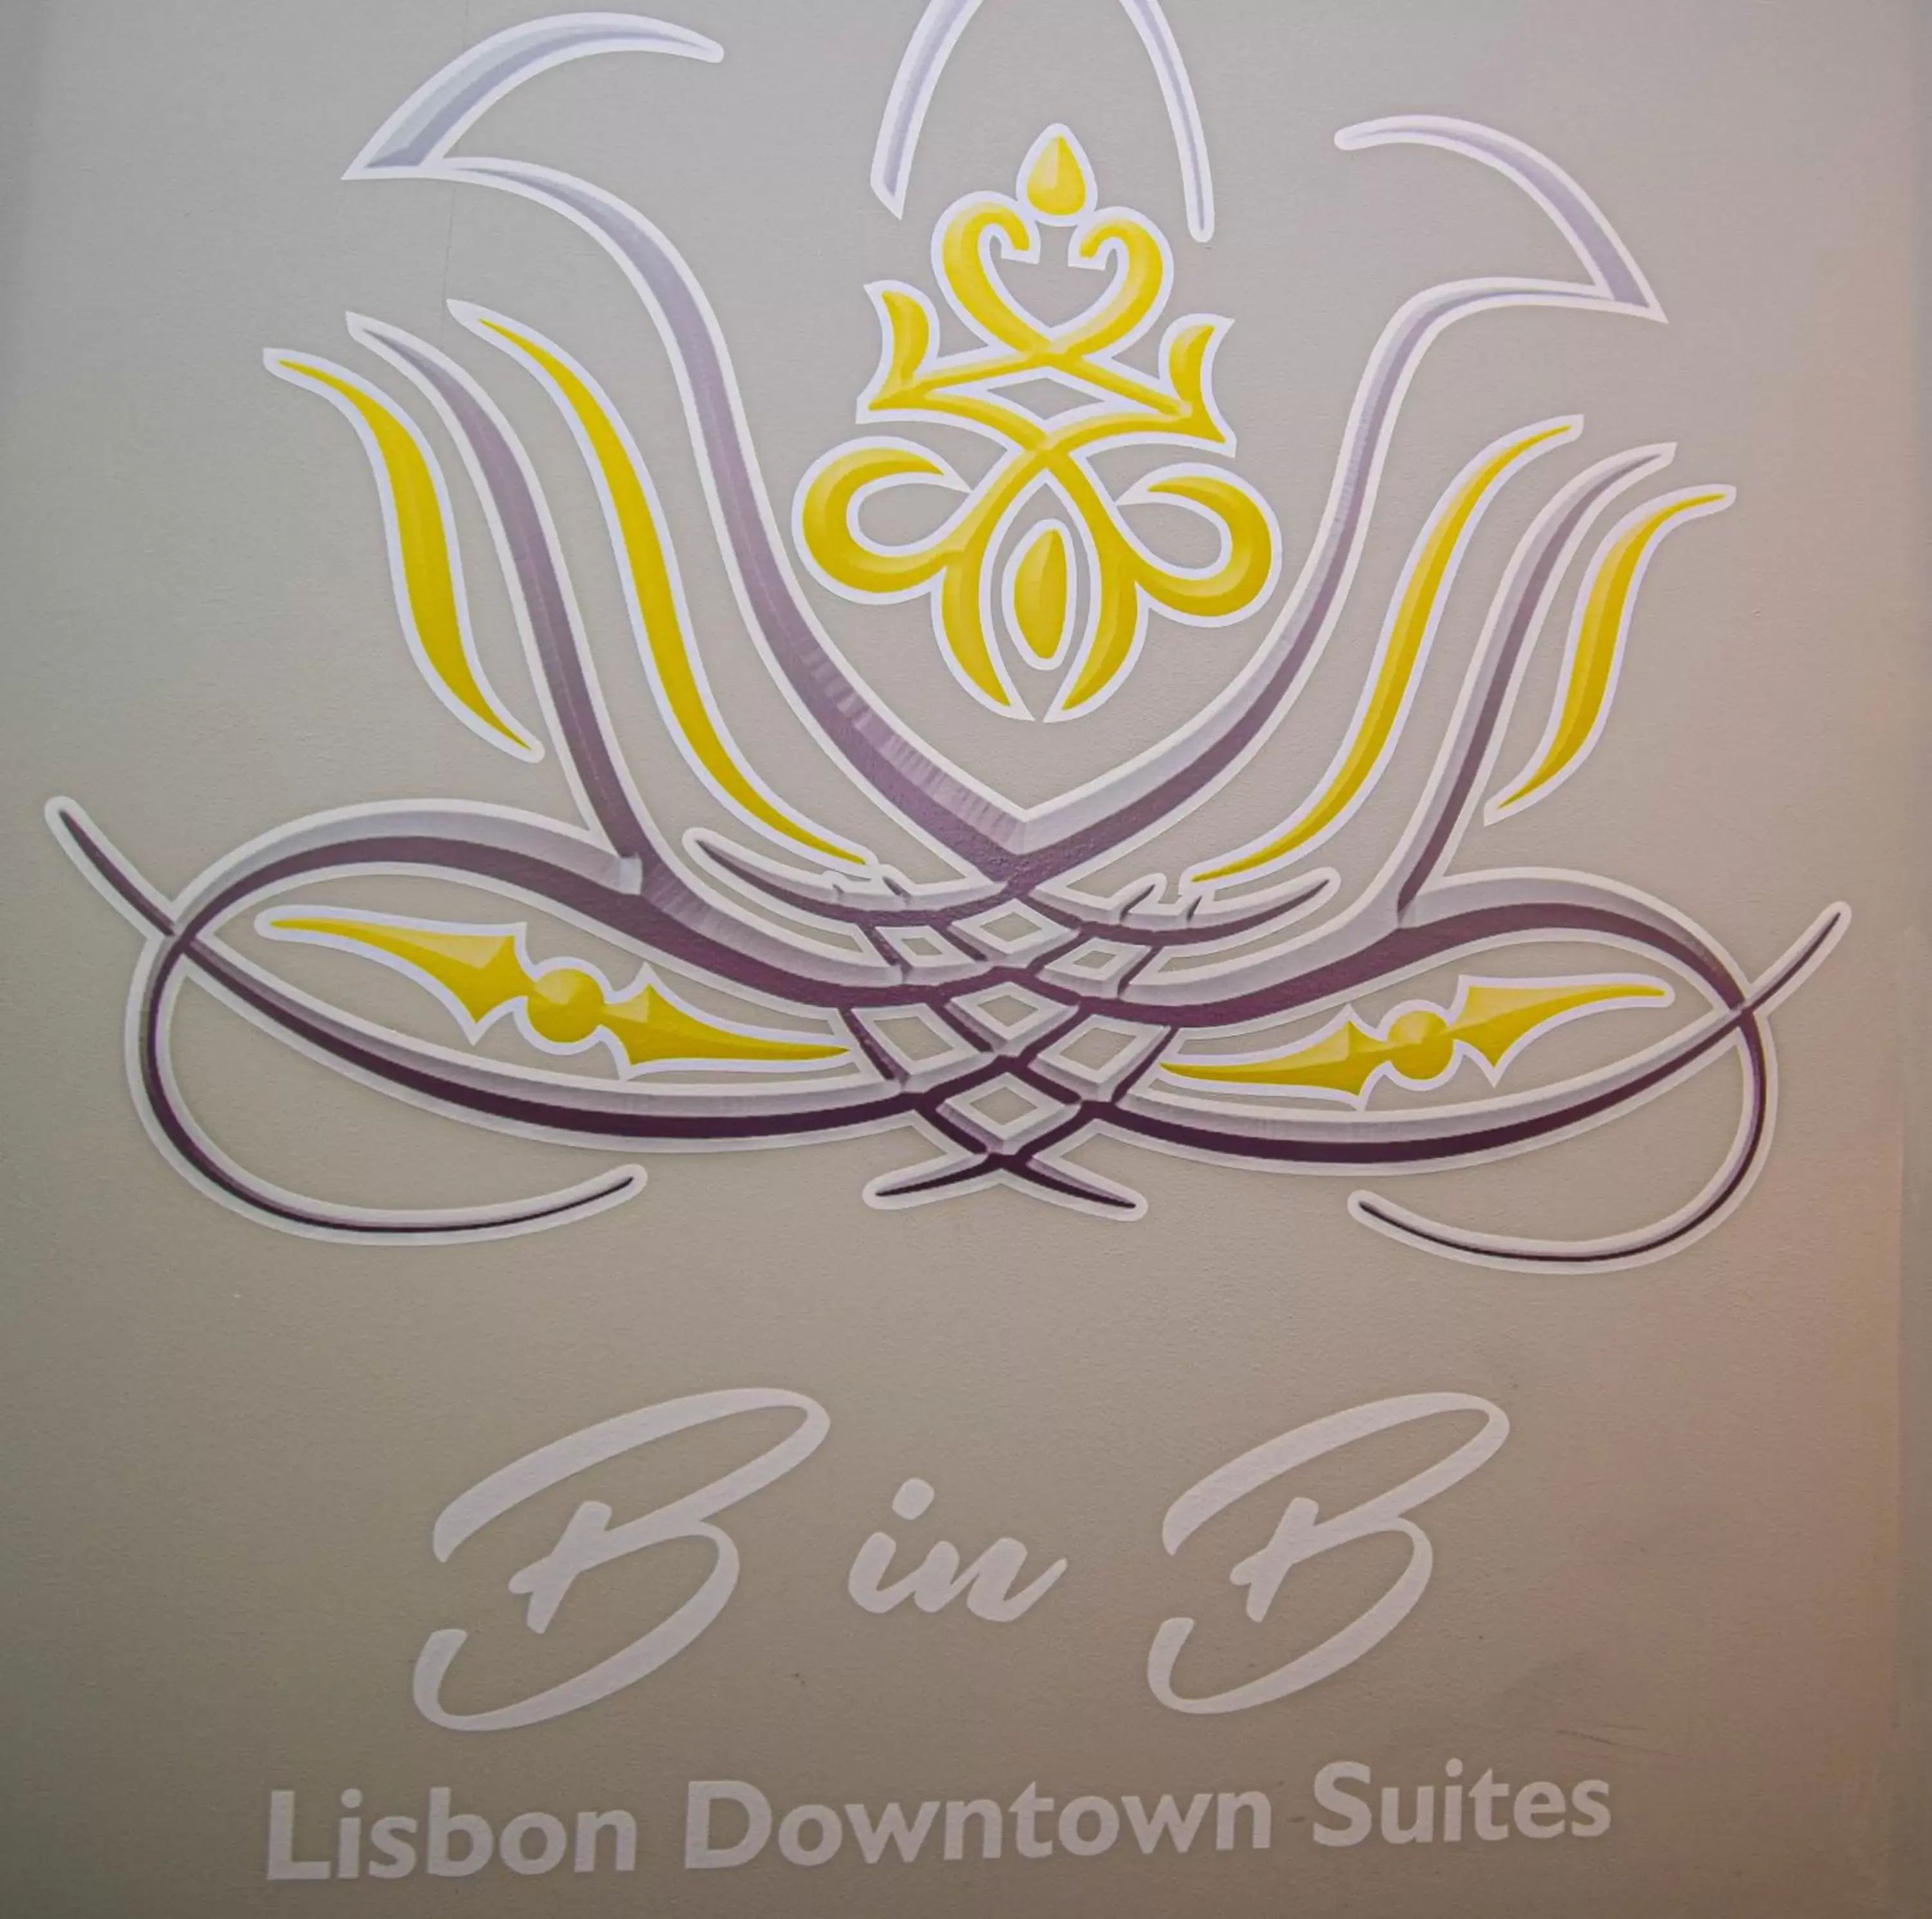 Property logo or sign in B in B Lisbon Downtown Suites